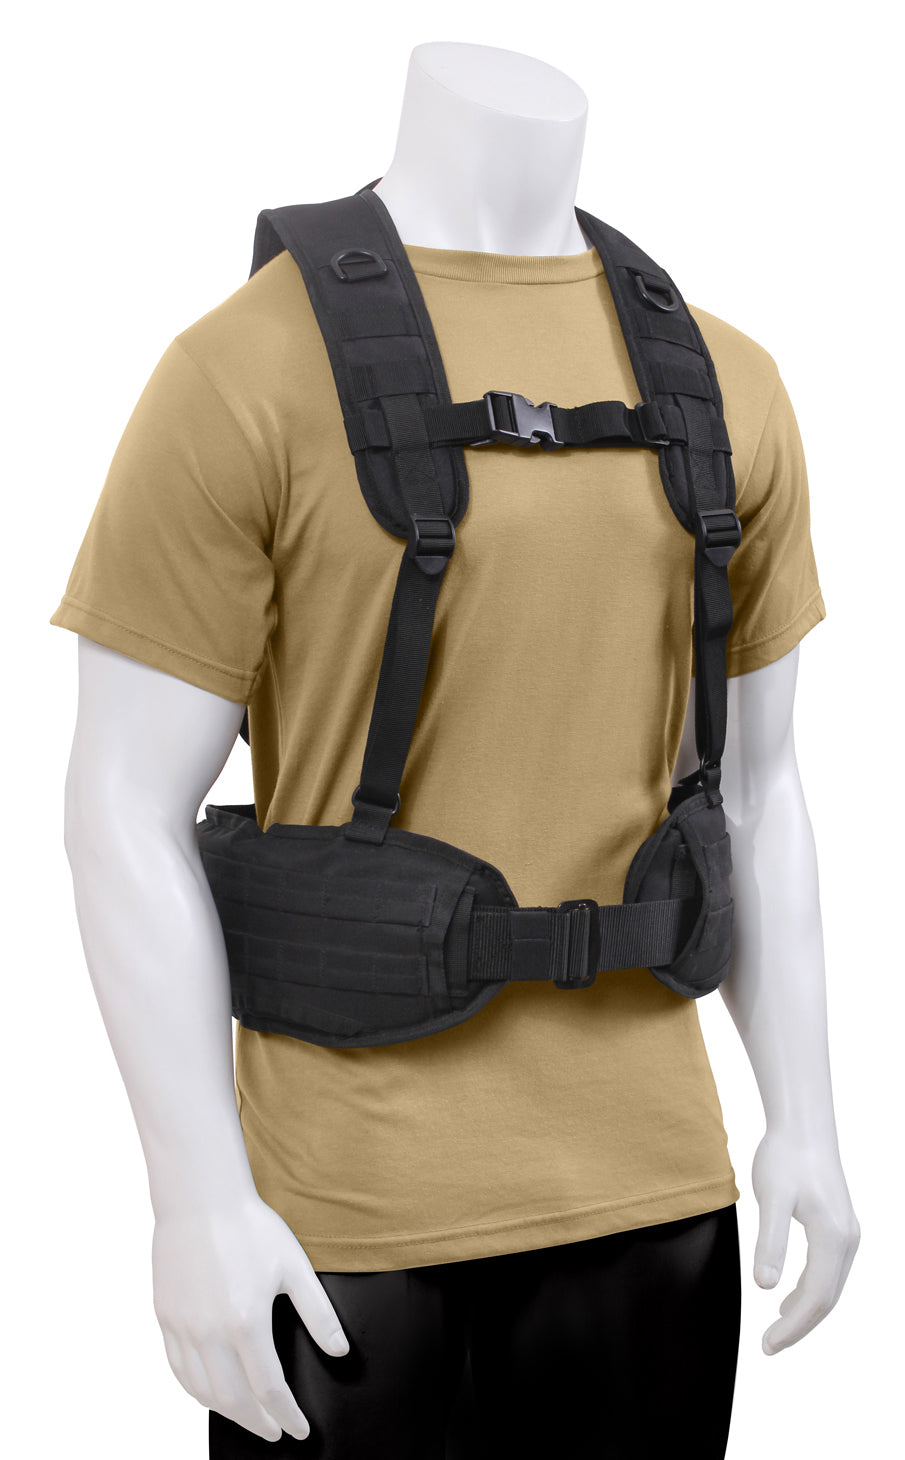 Rothco Battle Harness - Tactical Choice Plus